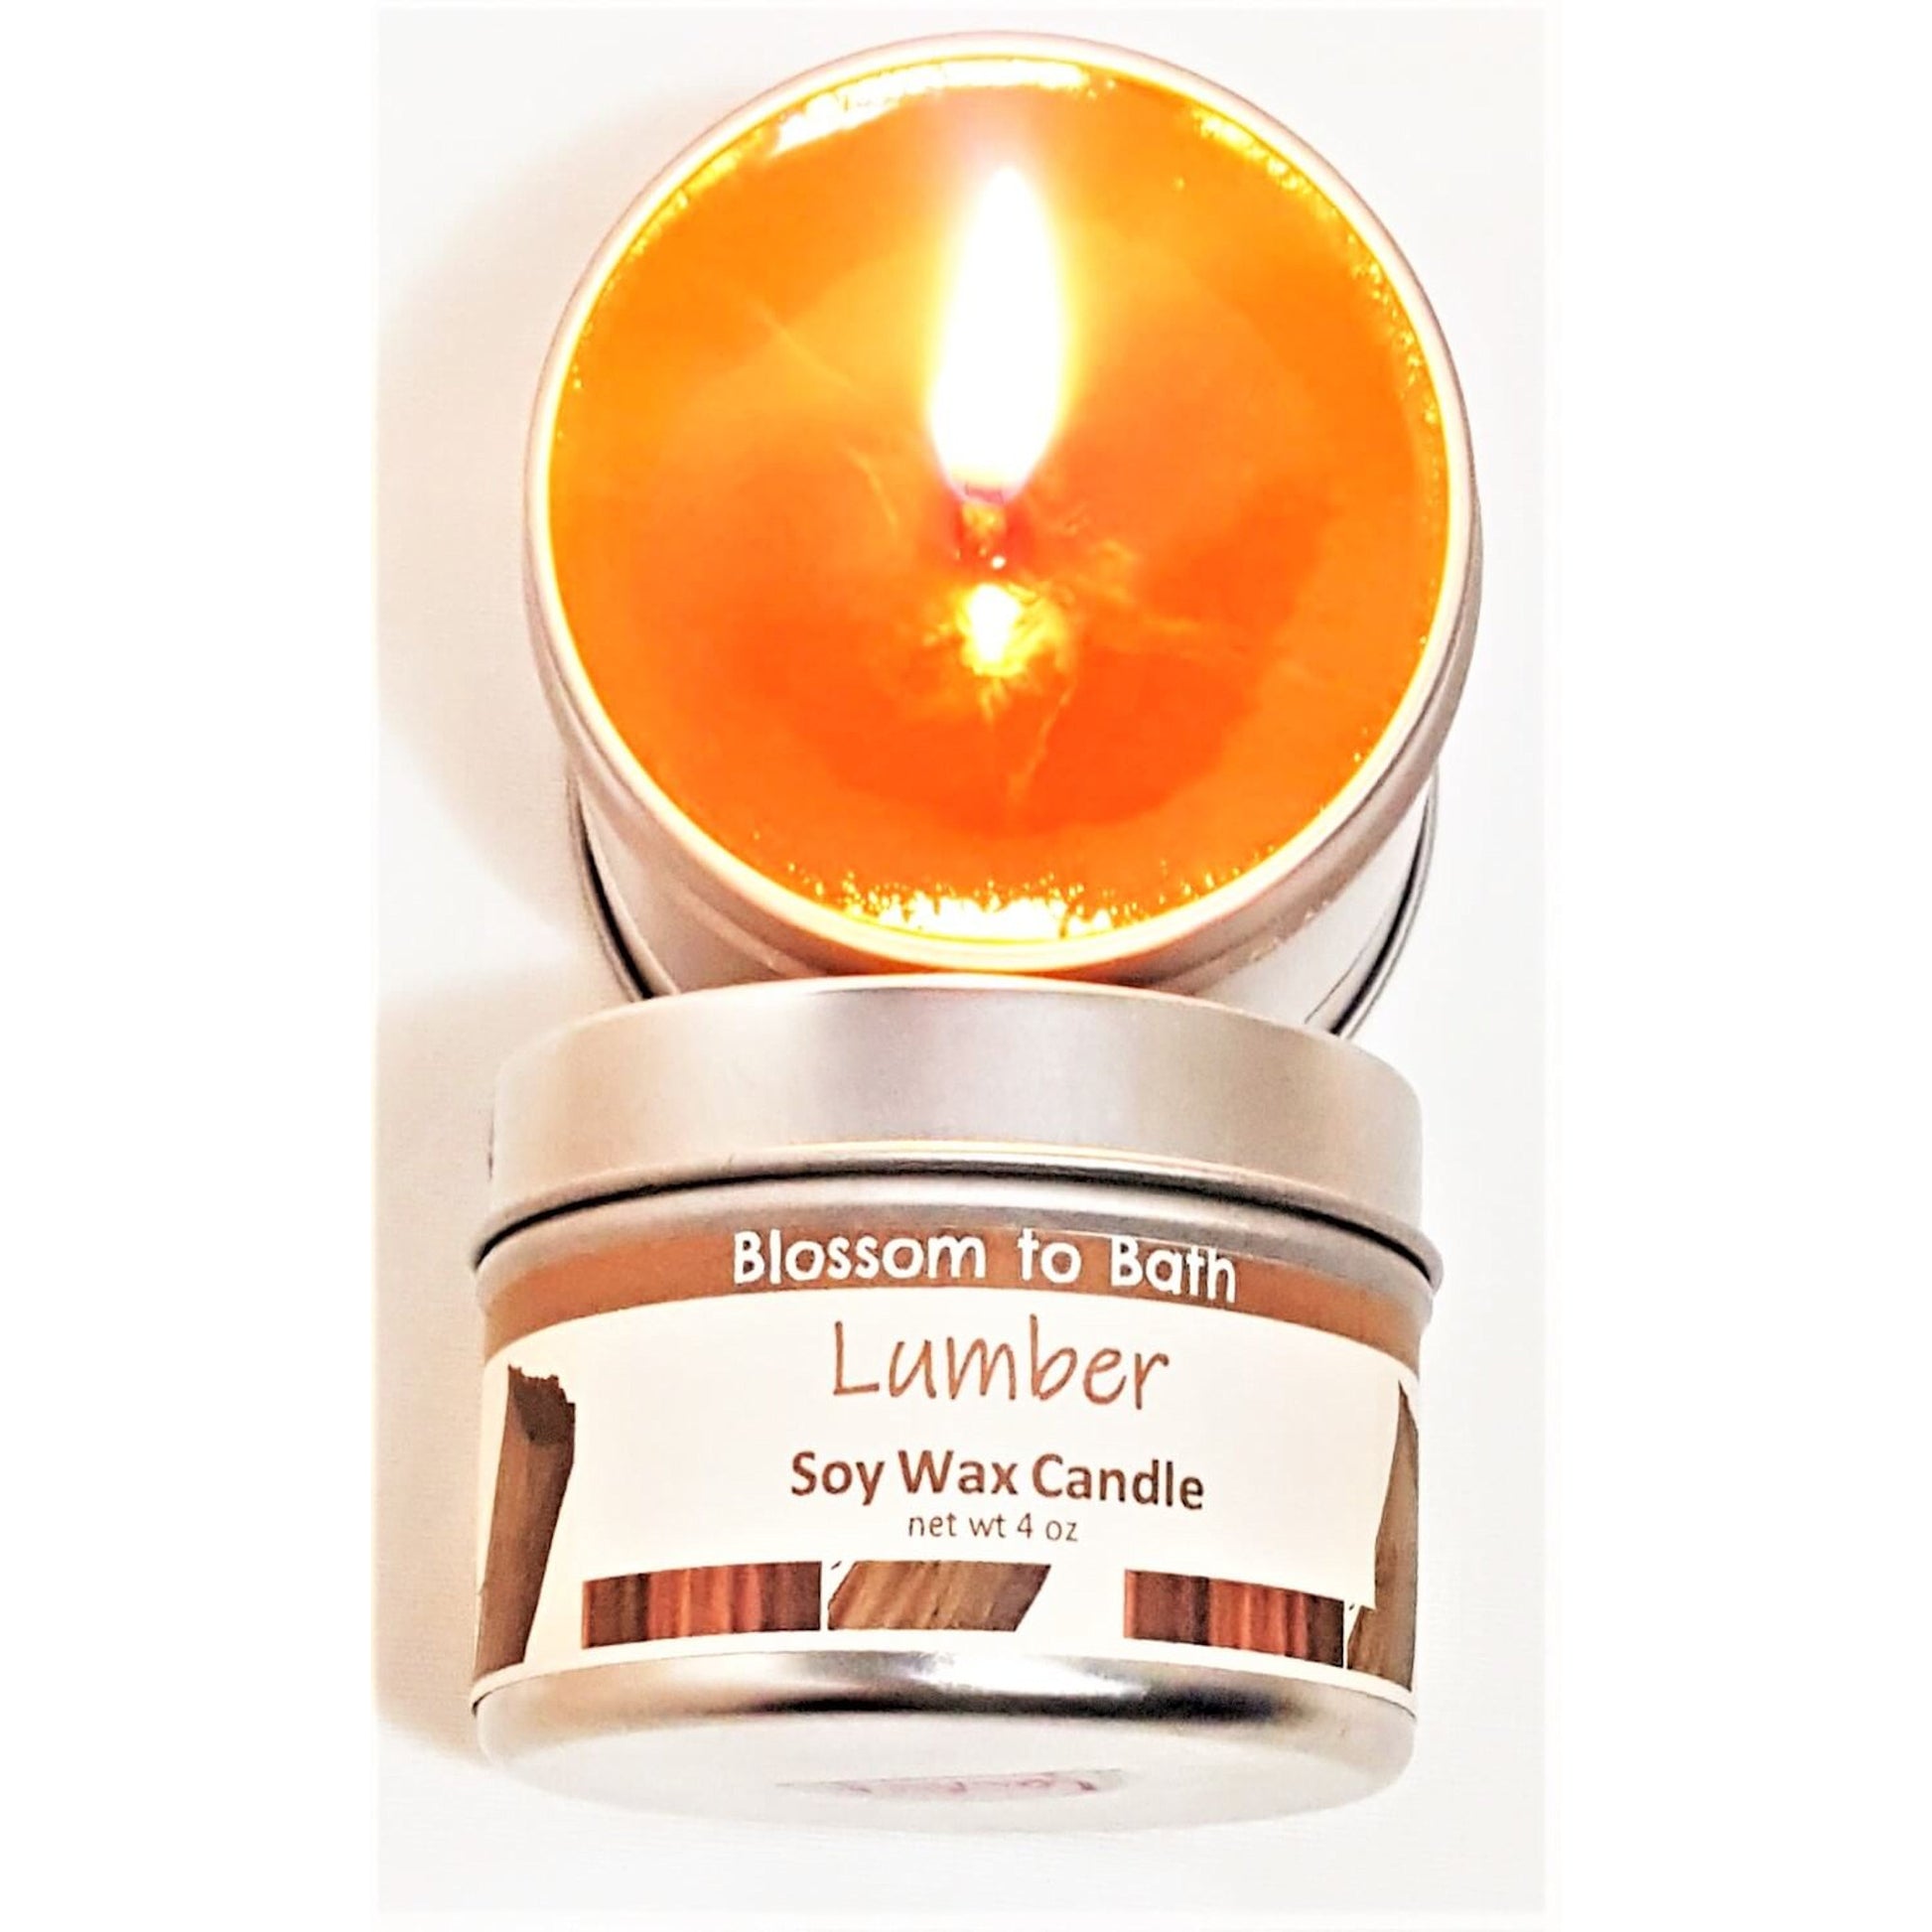 Buy Blossom to Bath Lumber Soy Wax Candle from Flowersong Soap Studio.  Fill the air with a charming fragrance that lasts for hours  A masculine fragrance that echoes fresh cut trees.